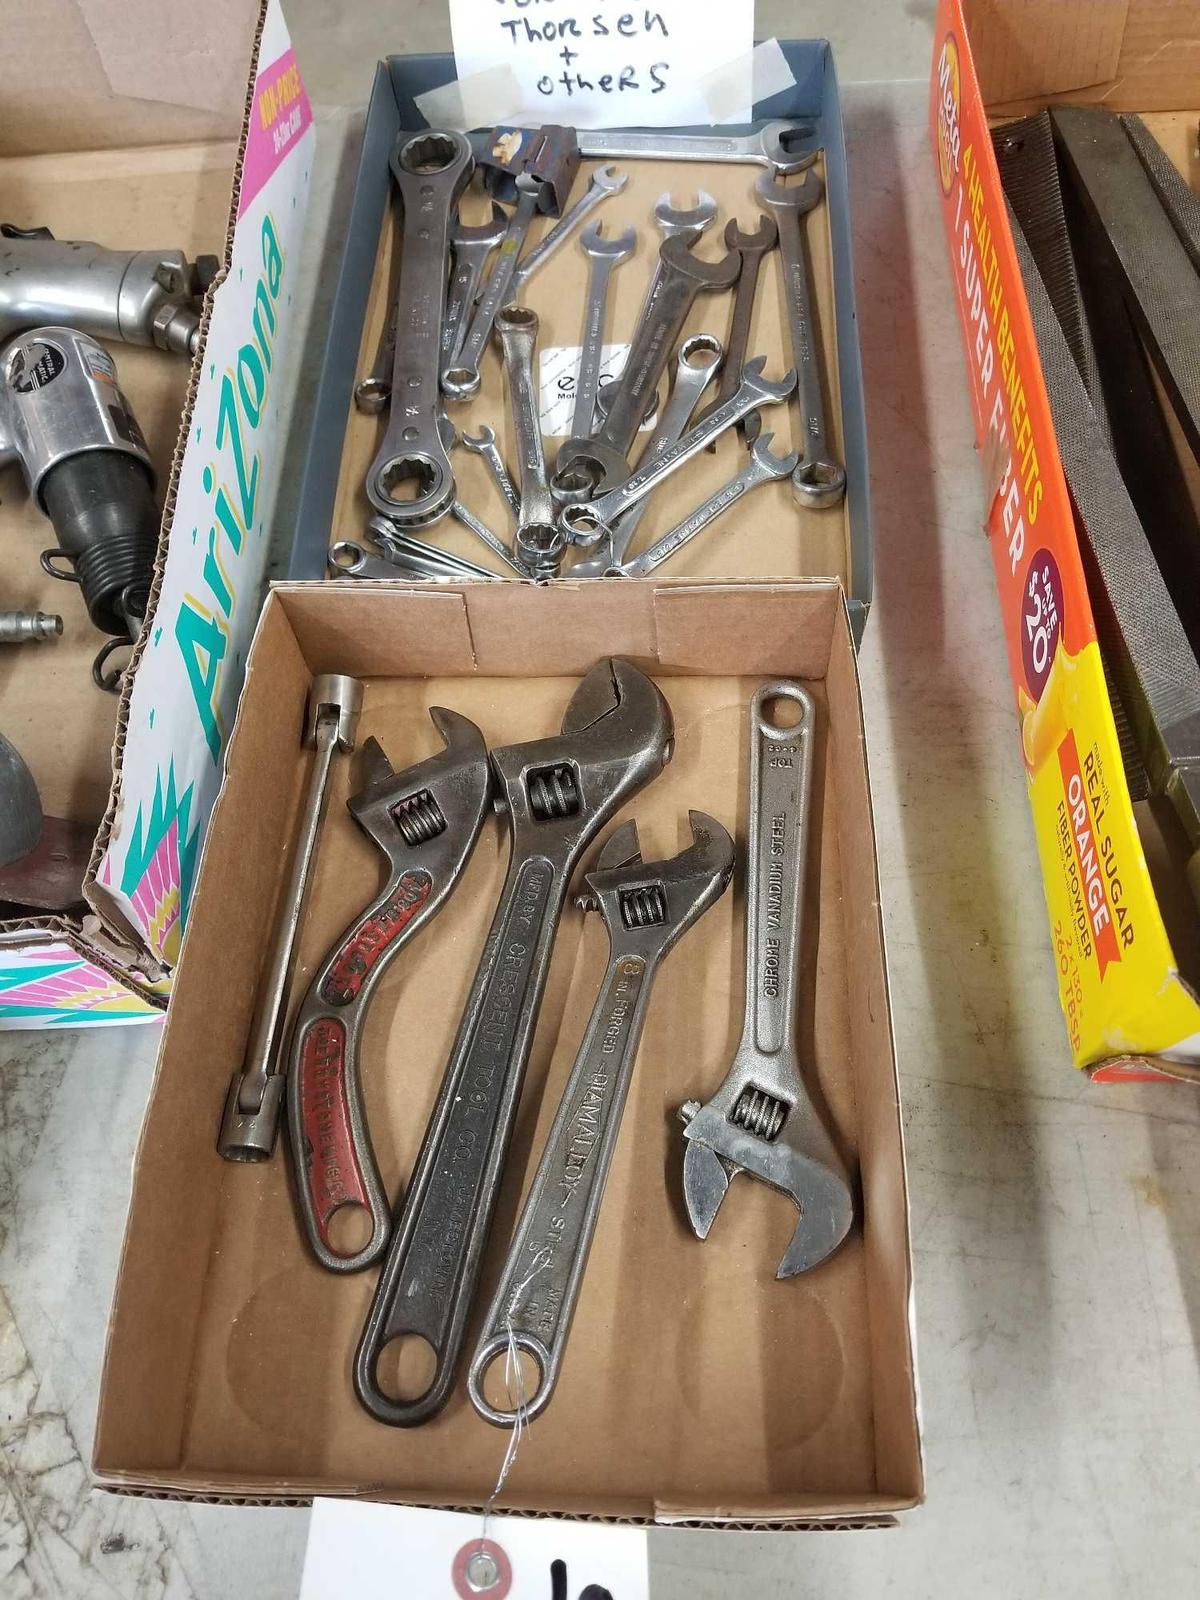 2 boxes of wrenches